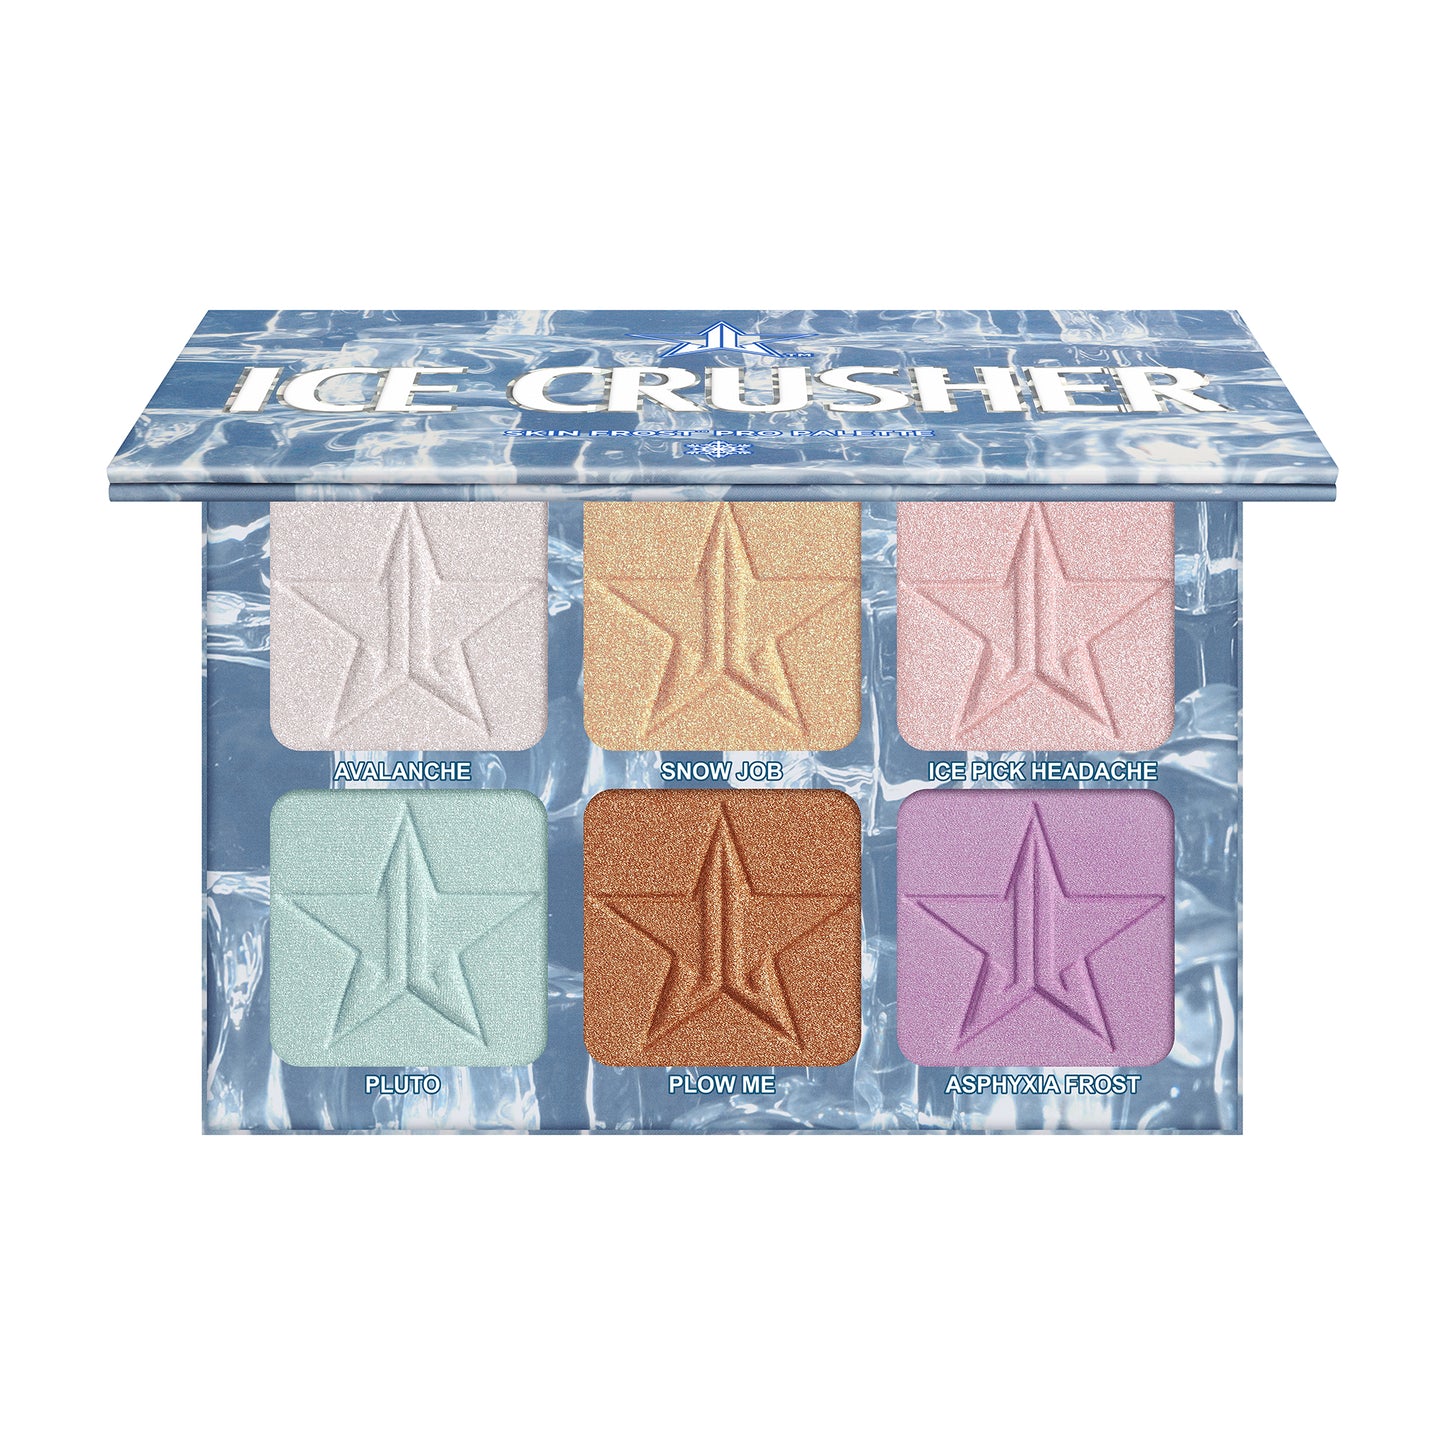 Ice Crusher Skin Frost™ Pro Palette